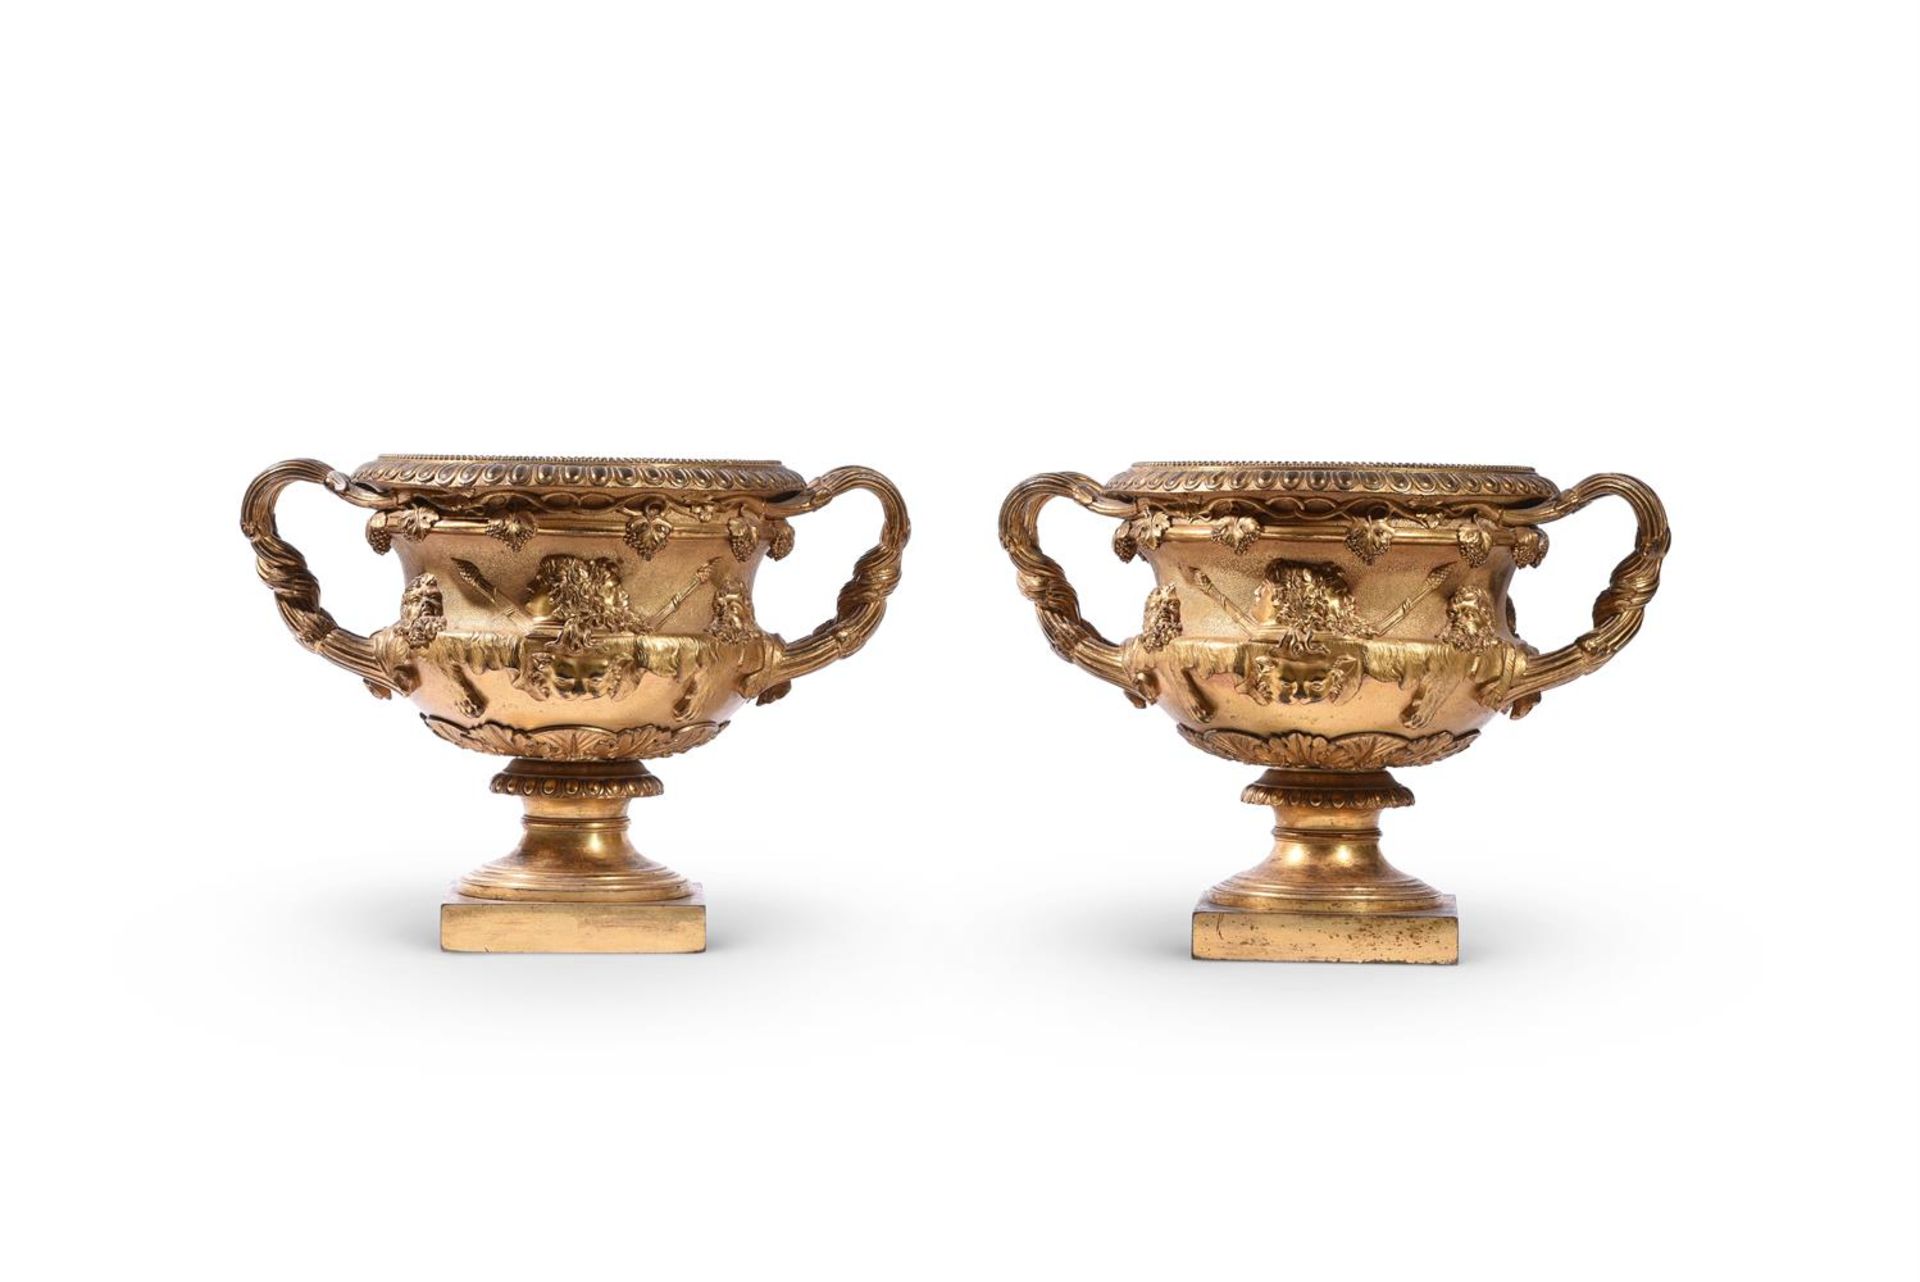 AFTER THE ANTIQUE, A PAIR OF REGENCY ORMOLU WARWICK VASES, EARLY 19TH CENTURY - Image 2 of 4